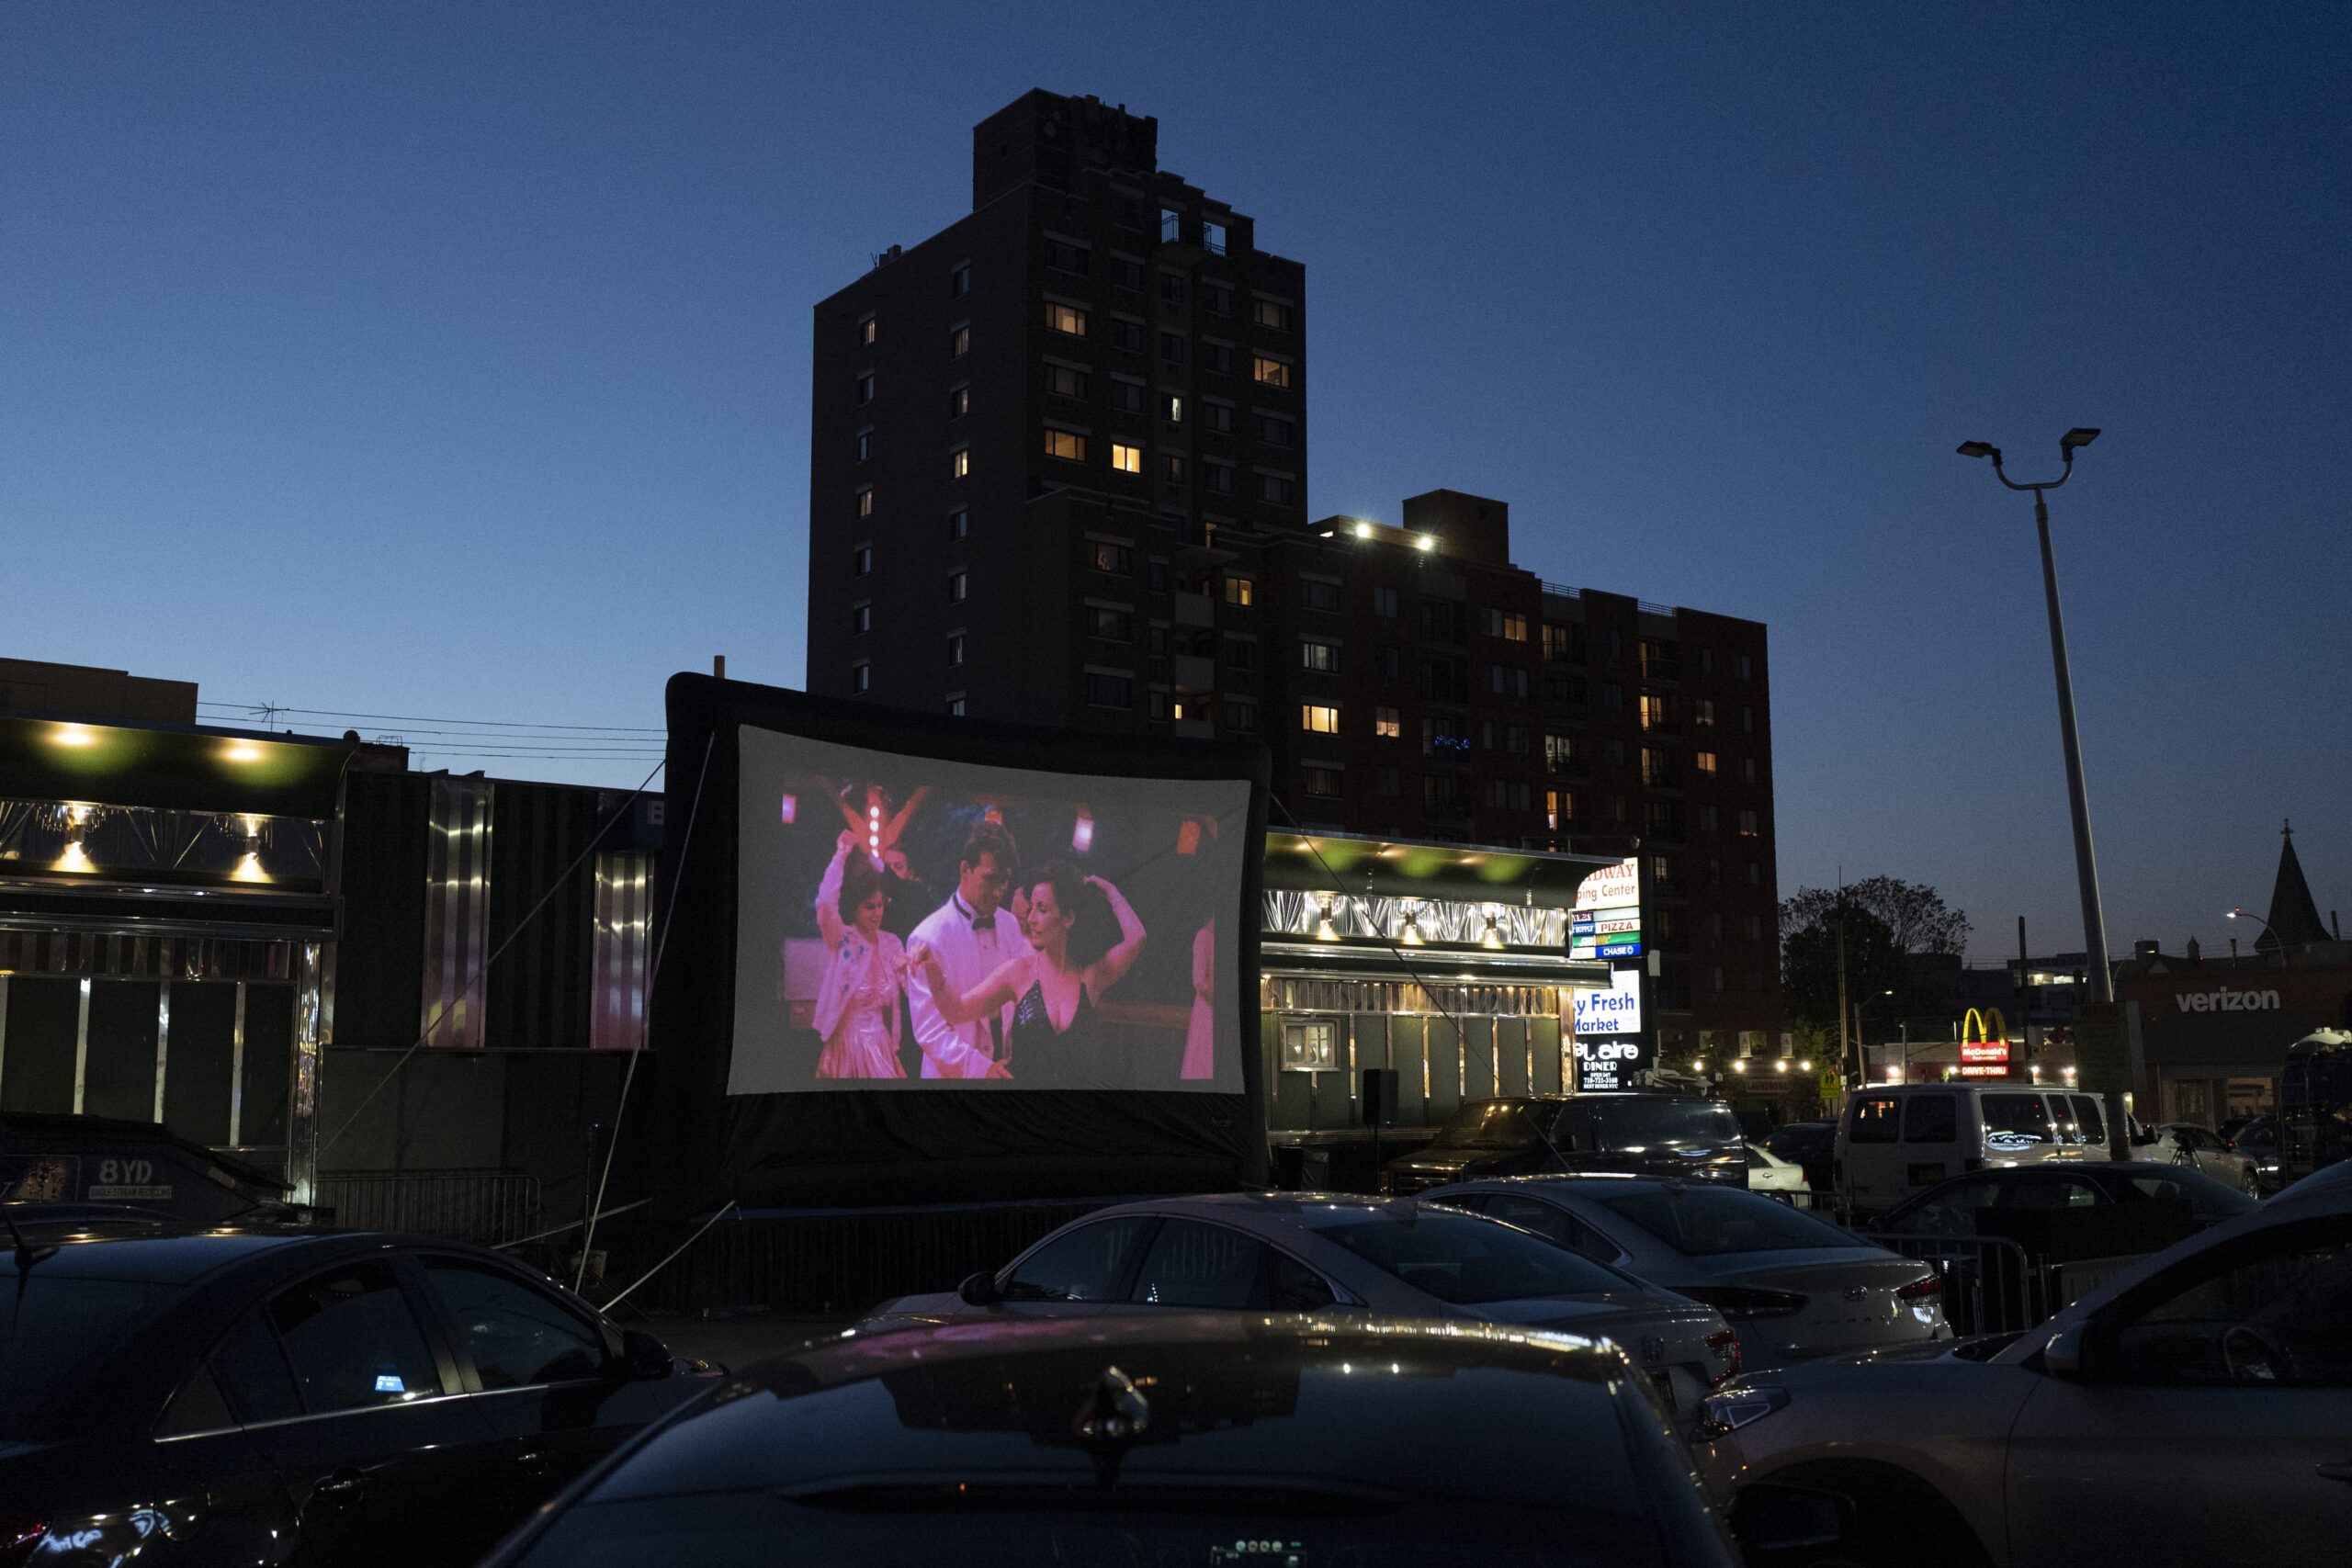 ‘Pop-Up’ Drive-In Theaters Providing Safe Entertainment During Pandemic